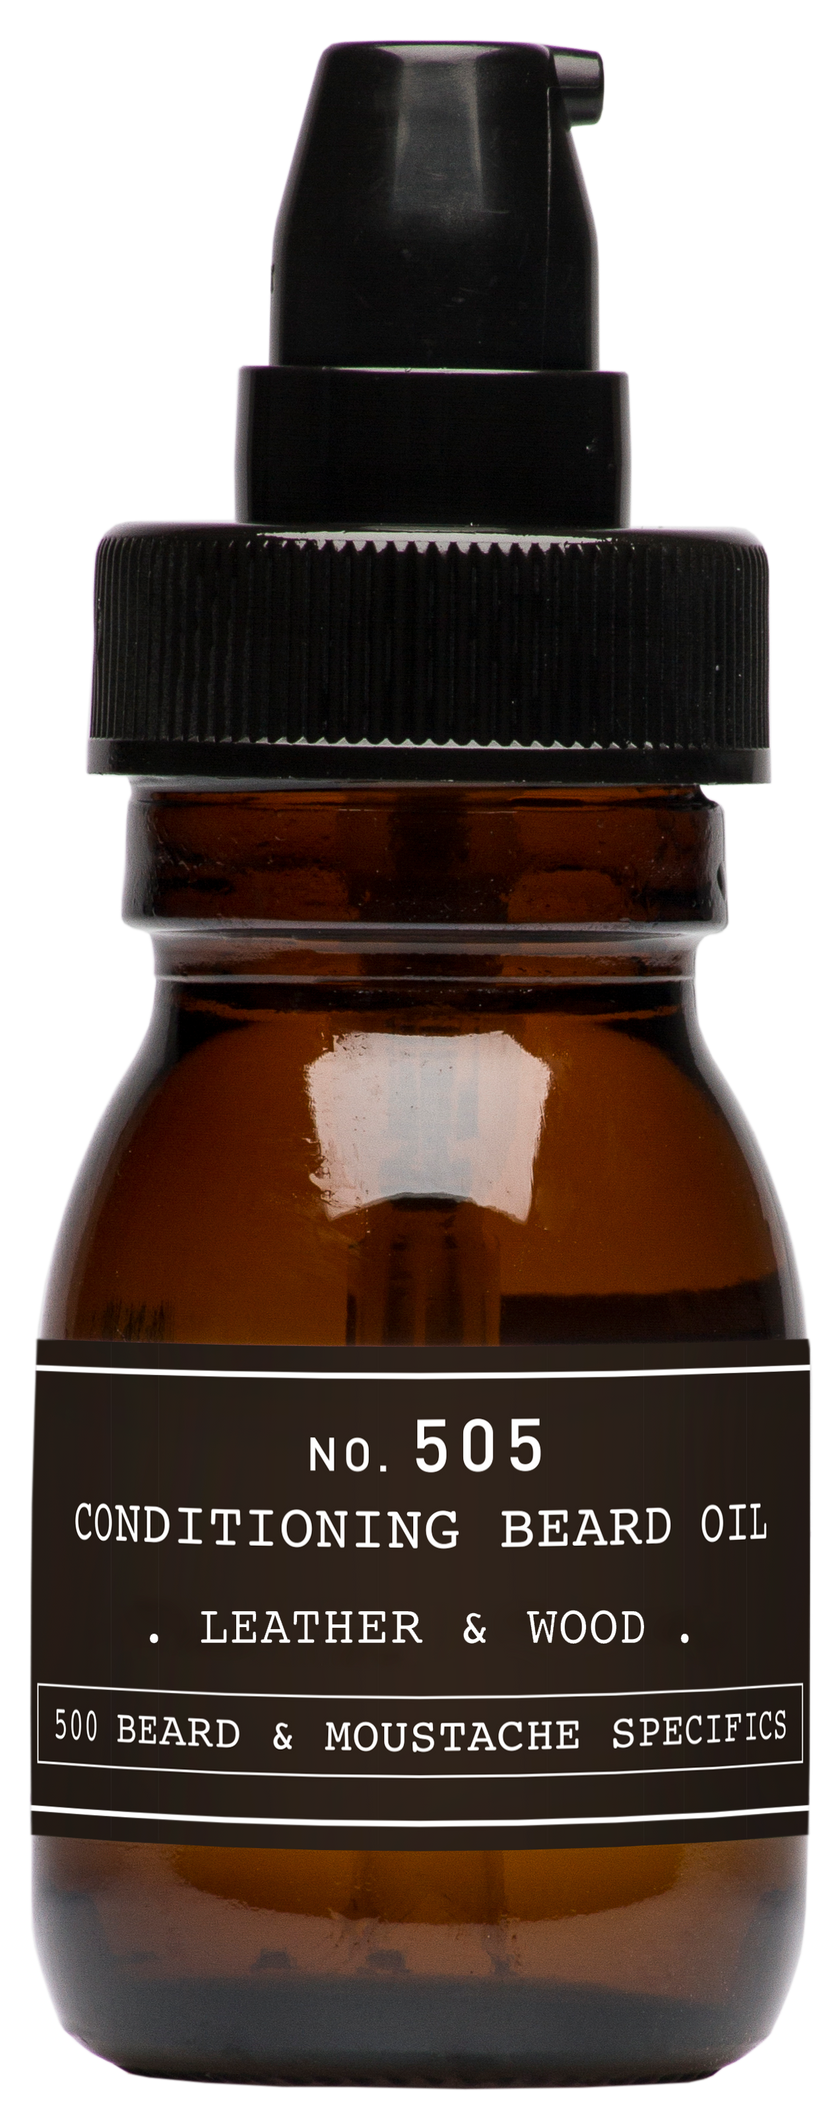 No. 505 Conditioning Beard Oil - Leather & Wood Image